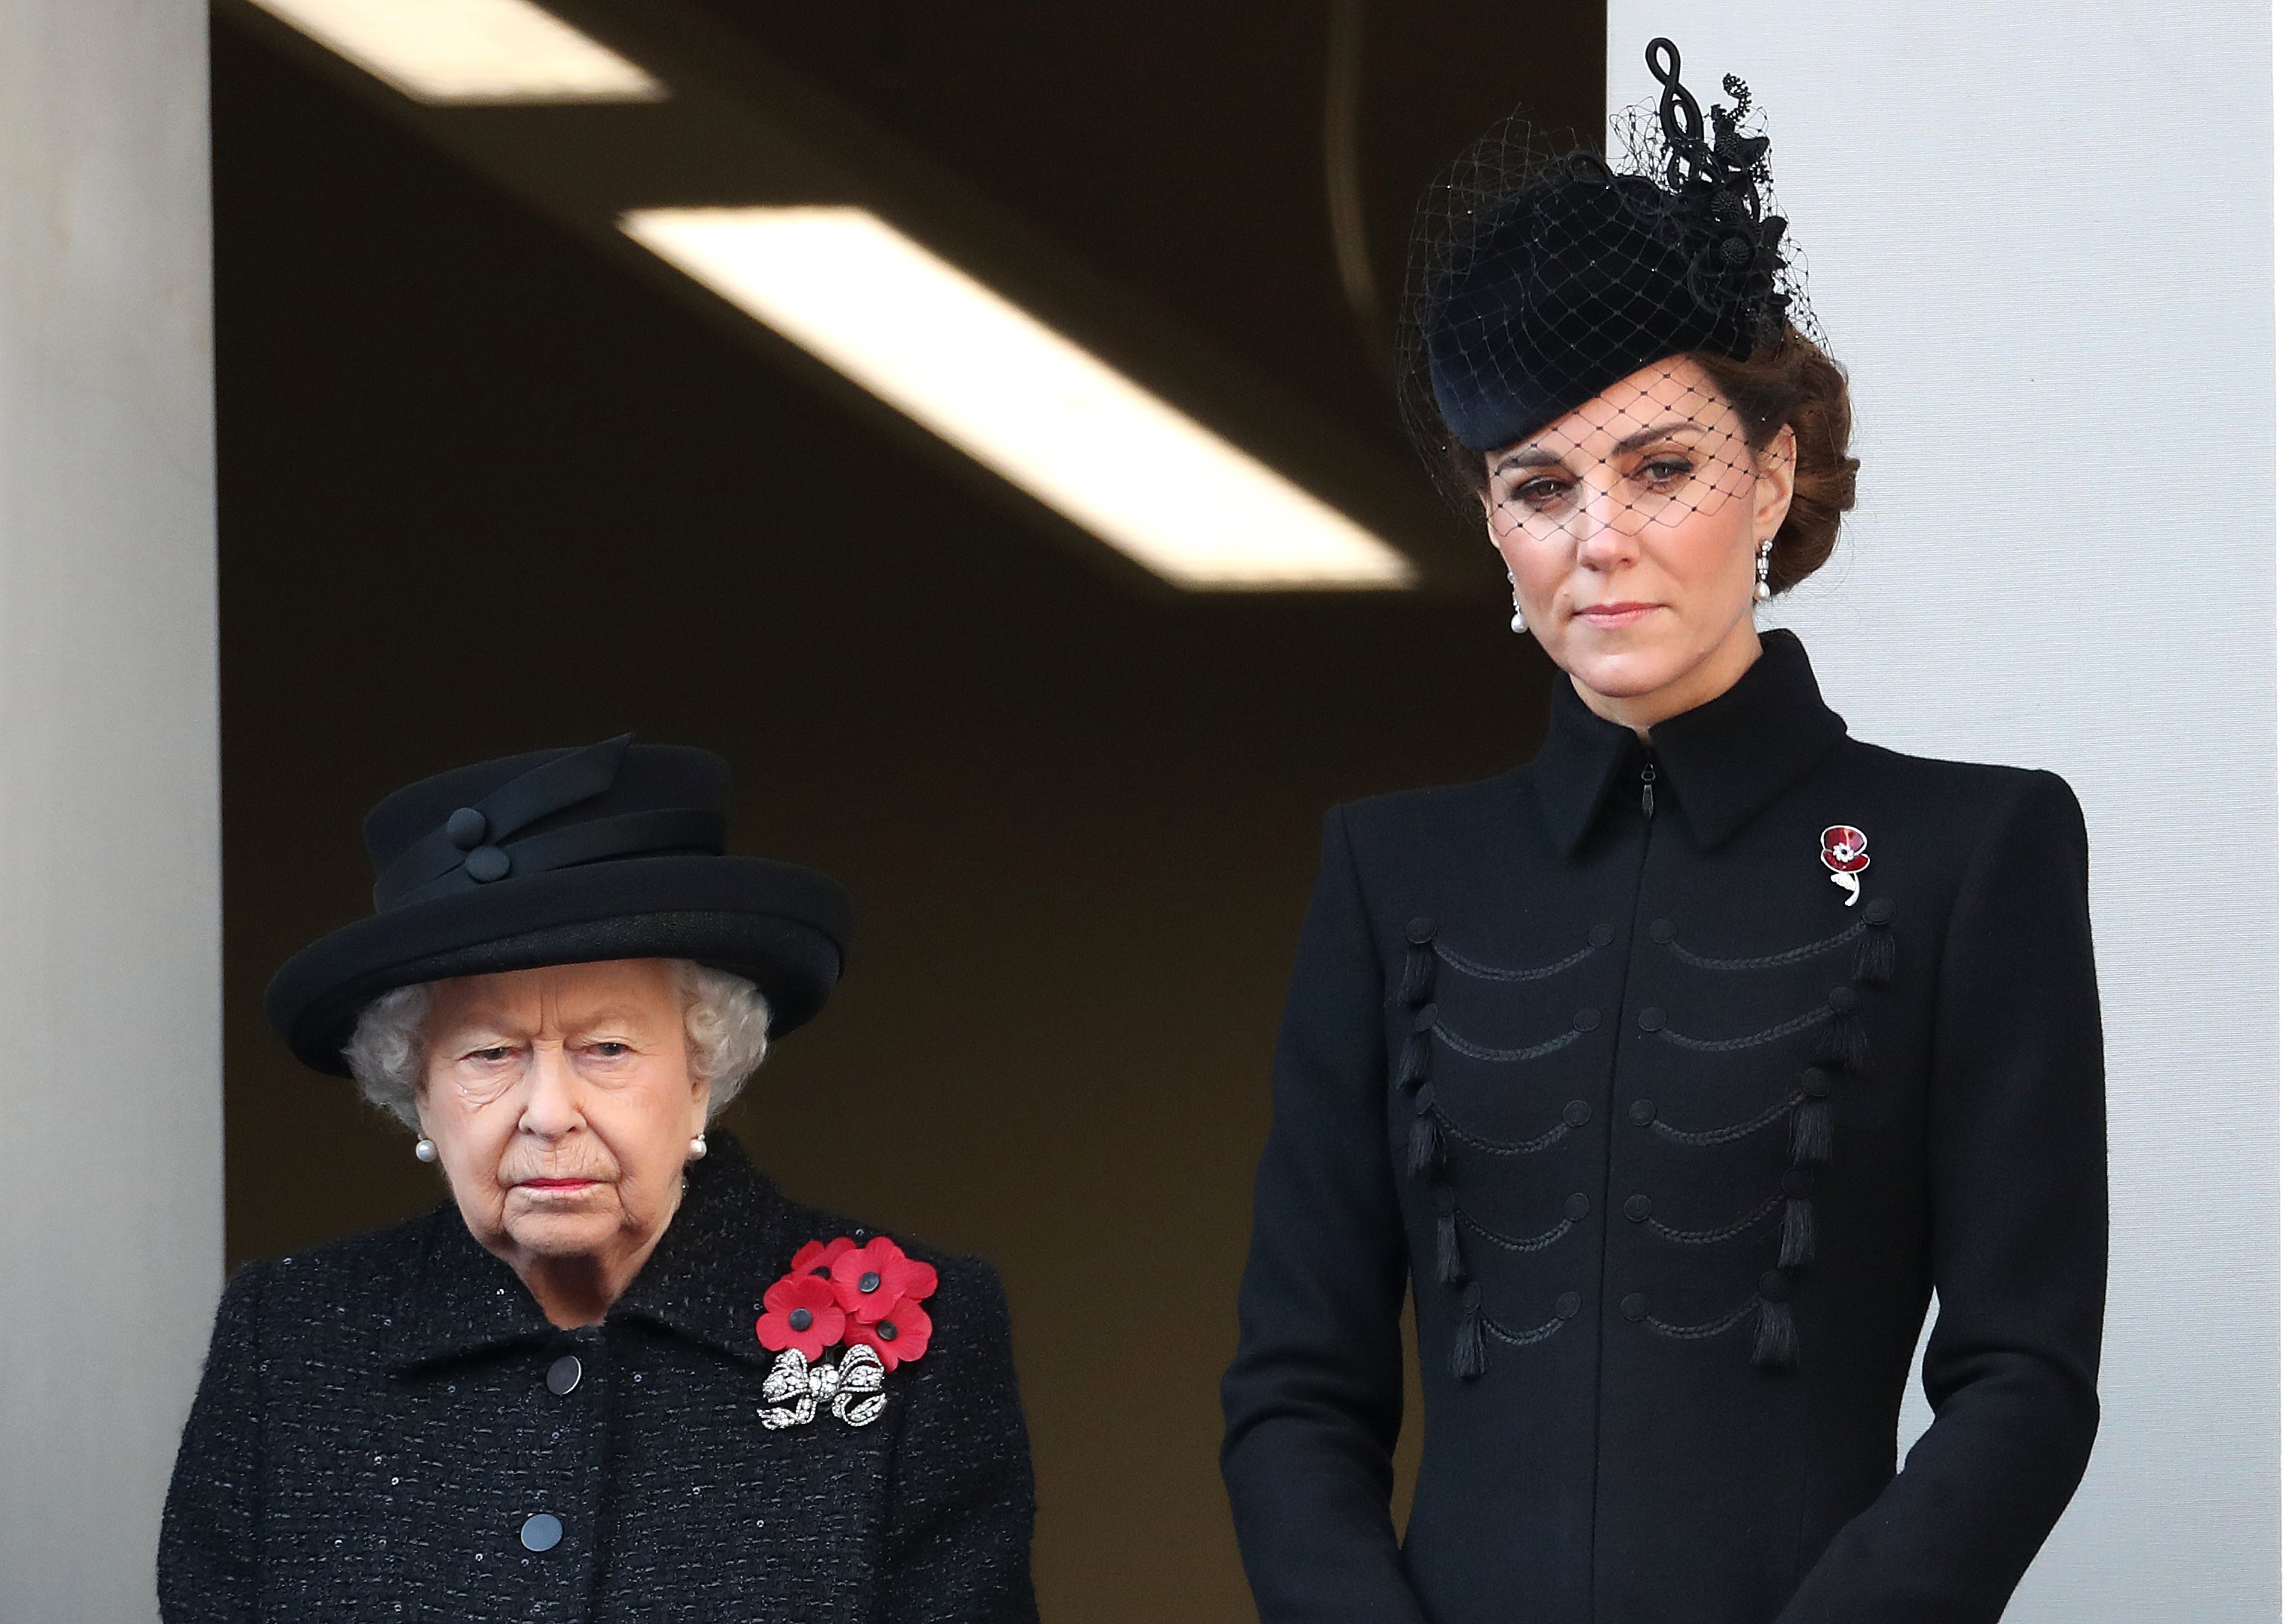 Kate Middleton standing next to Queen Elizabeth at the annual Remembrance Sunday memorial at The Cenotaph in London, England